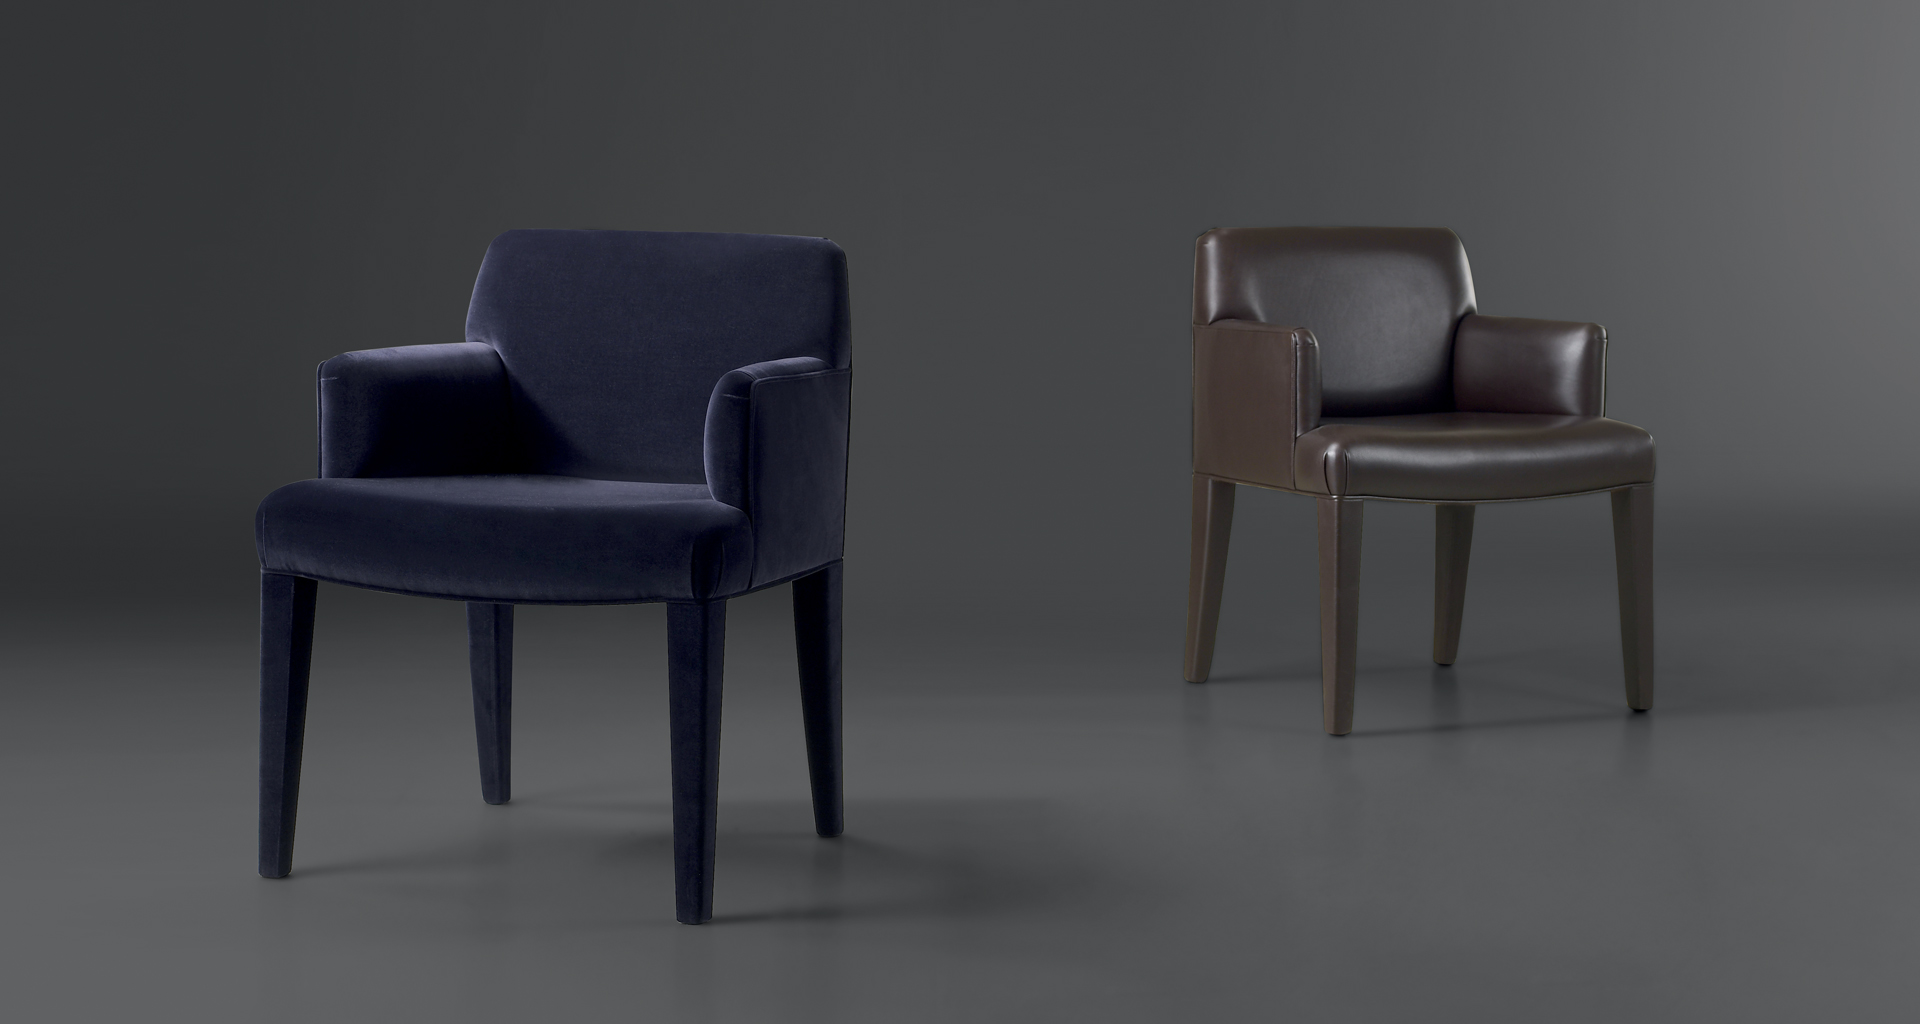 Isotta is a wooden dining chair with or without armrests and with a fabric or leather covered back, from Promemoria's catalogue | Promemoria